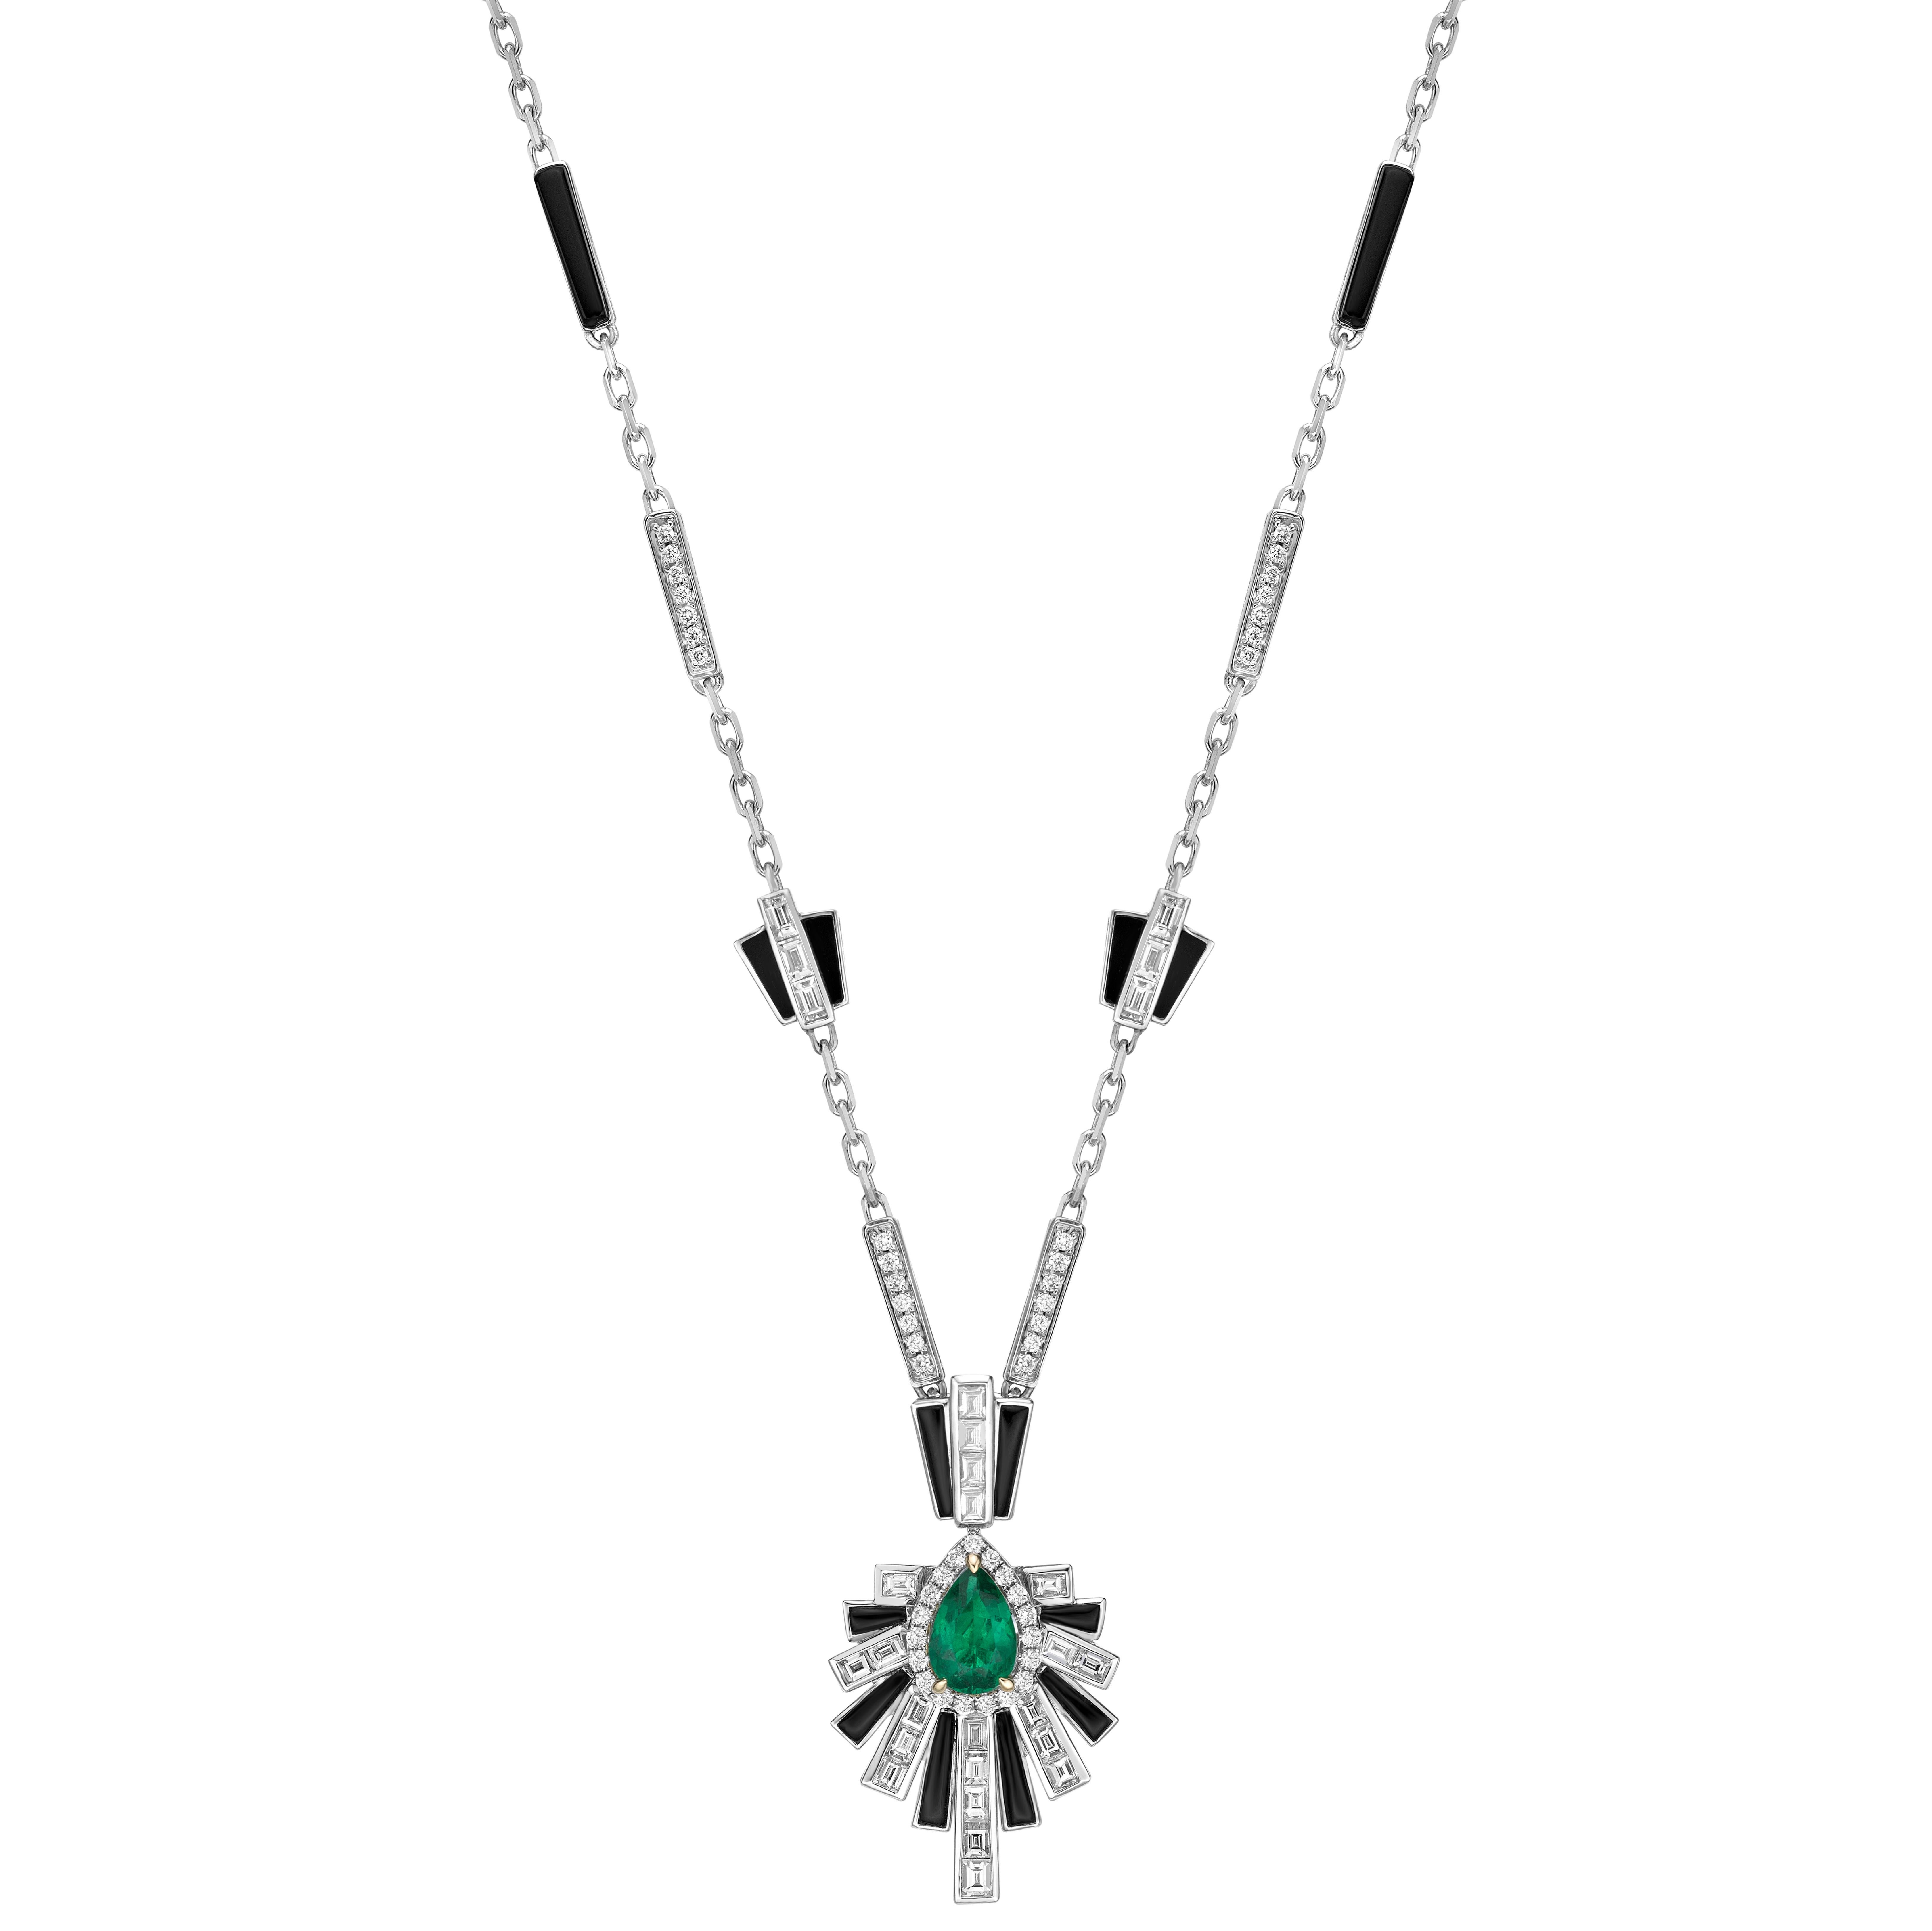 Starburst necklace from our Emerald Art Deco Style Collection. This necklace is beautifully constructed with layers of diamonds and black onyx to elevate the stunning Colombian Emeralds.

Designer emerald necklace in 18K white gold and yellow gold